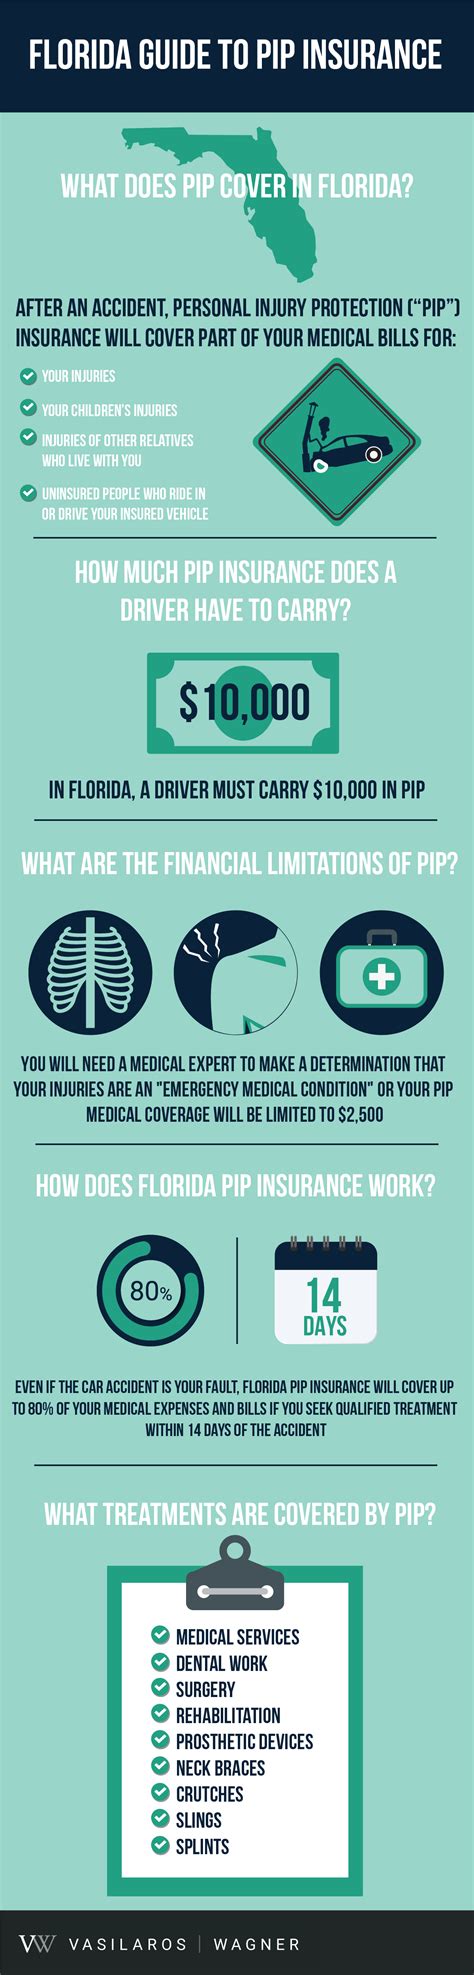 does florida require pip insurance